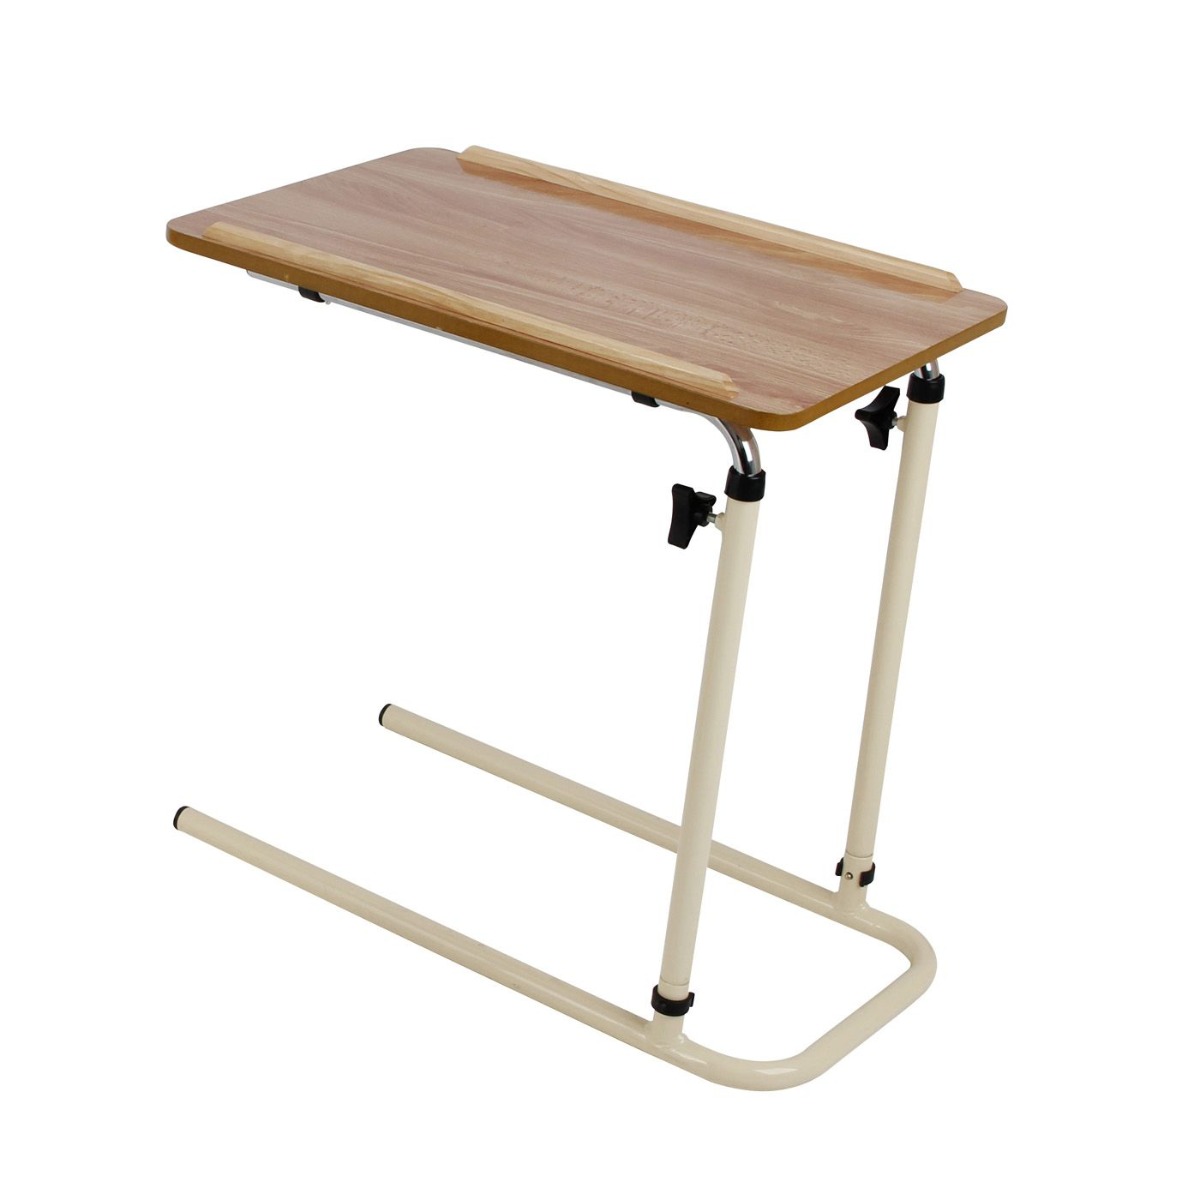 Homecraft Overbed Table without Castors